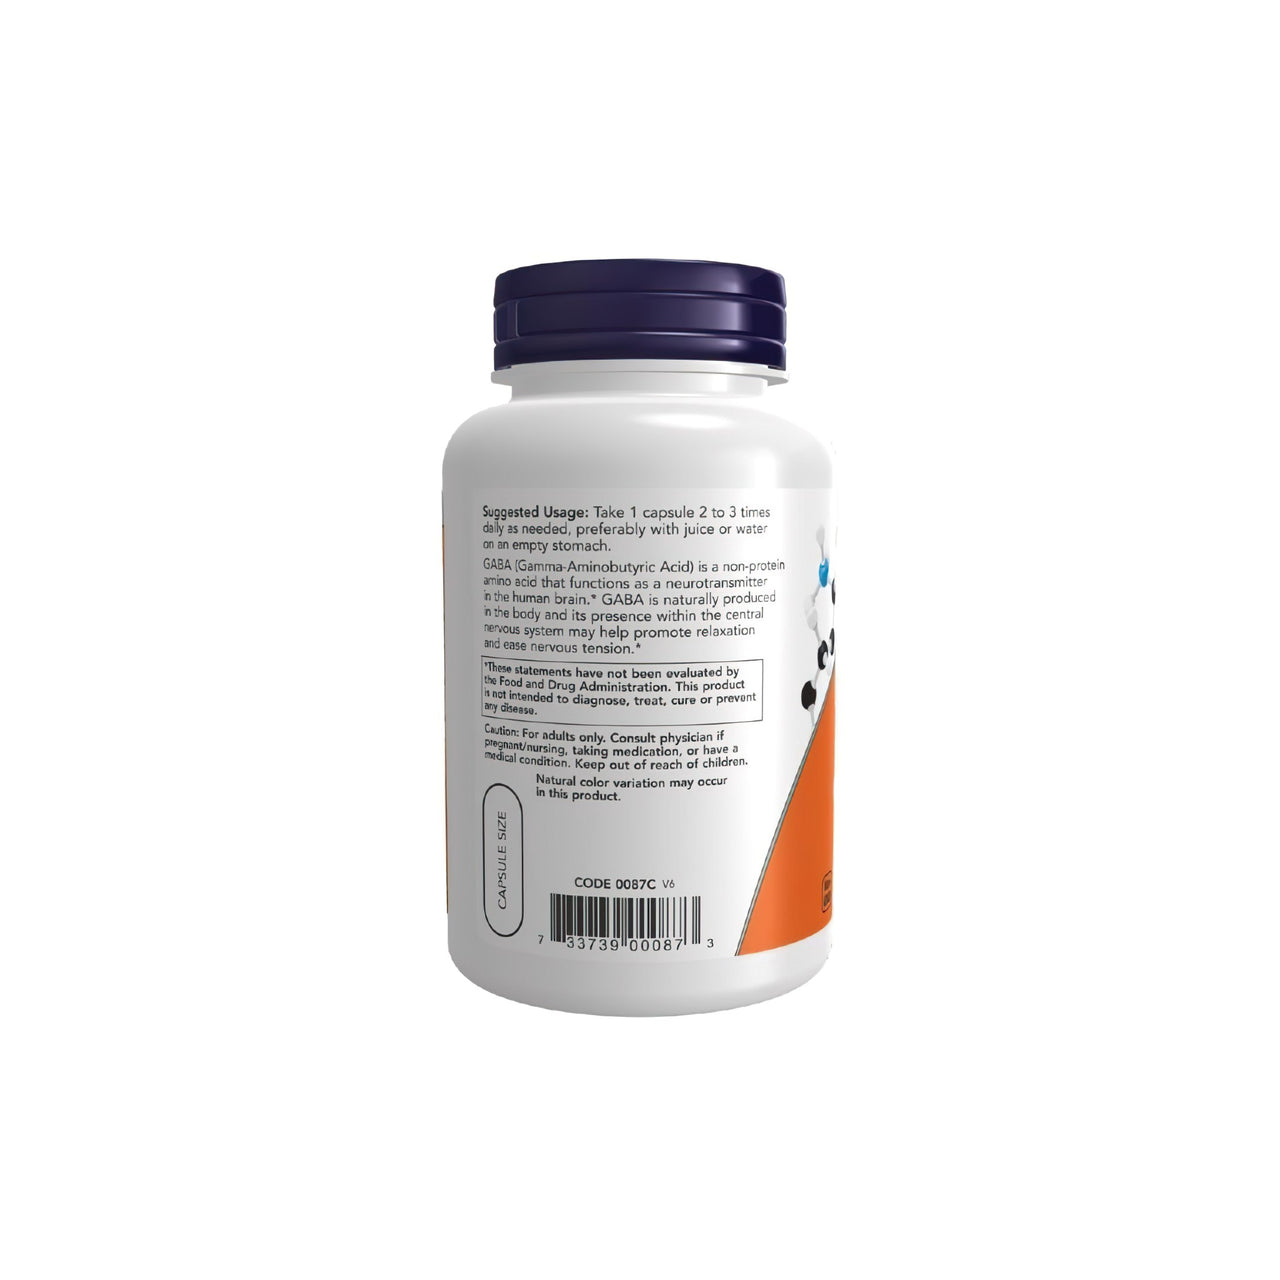 A bottle of Now Foods GABA 500 mg 200 Vegetable Capsules promoting relaxation on a white background.